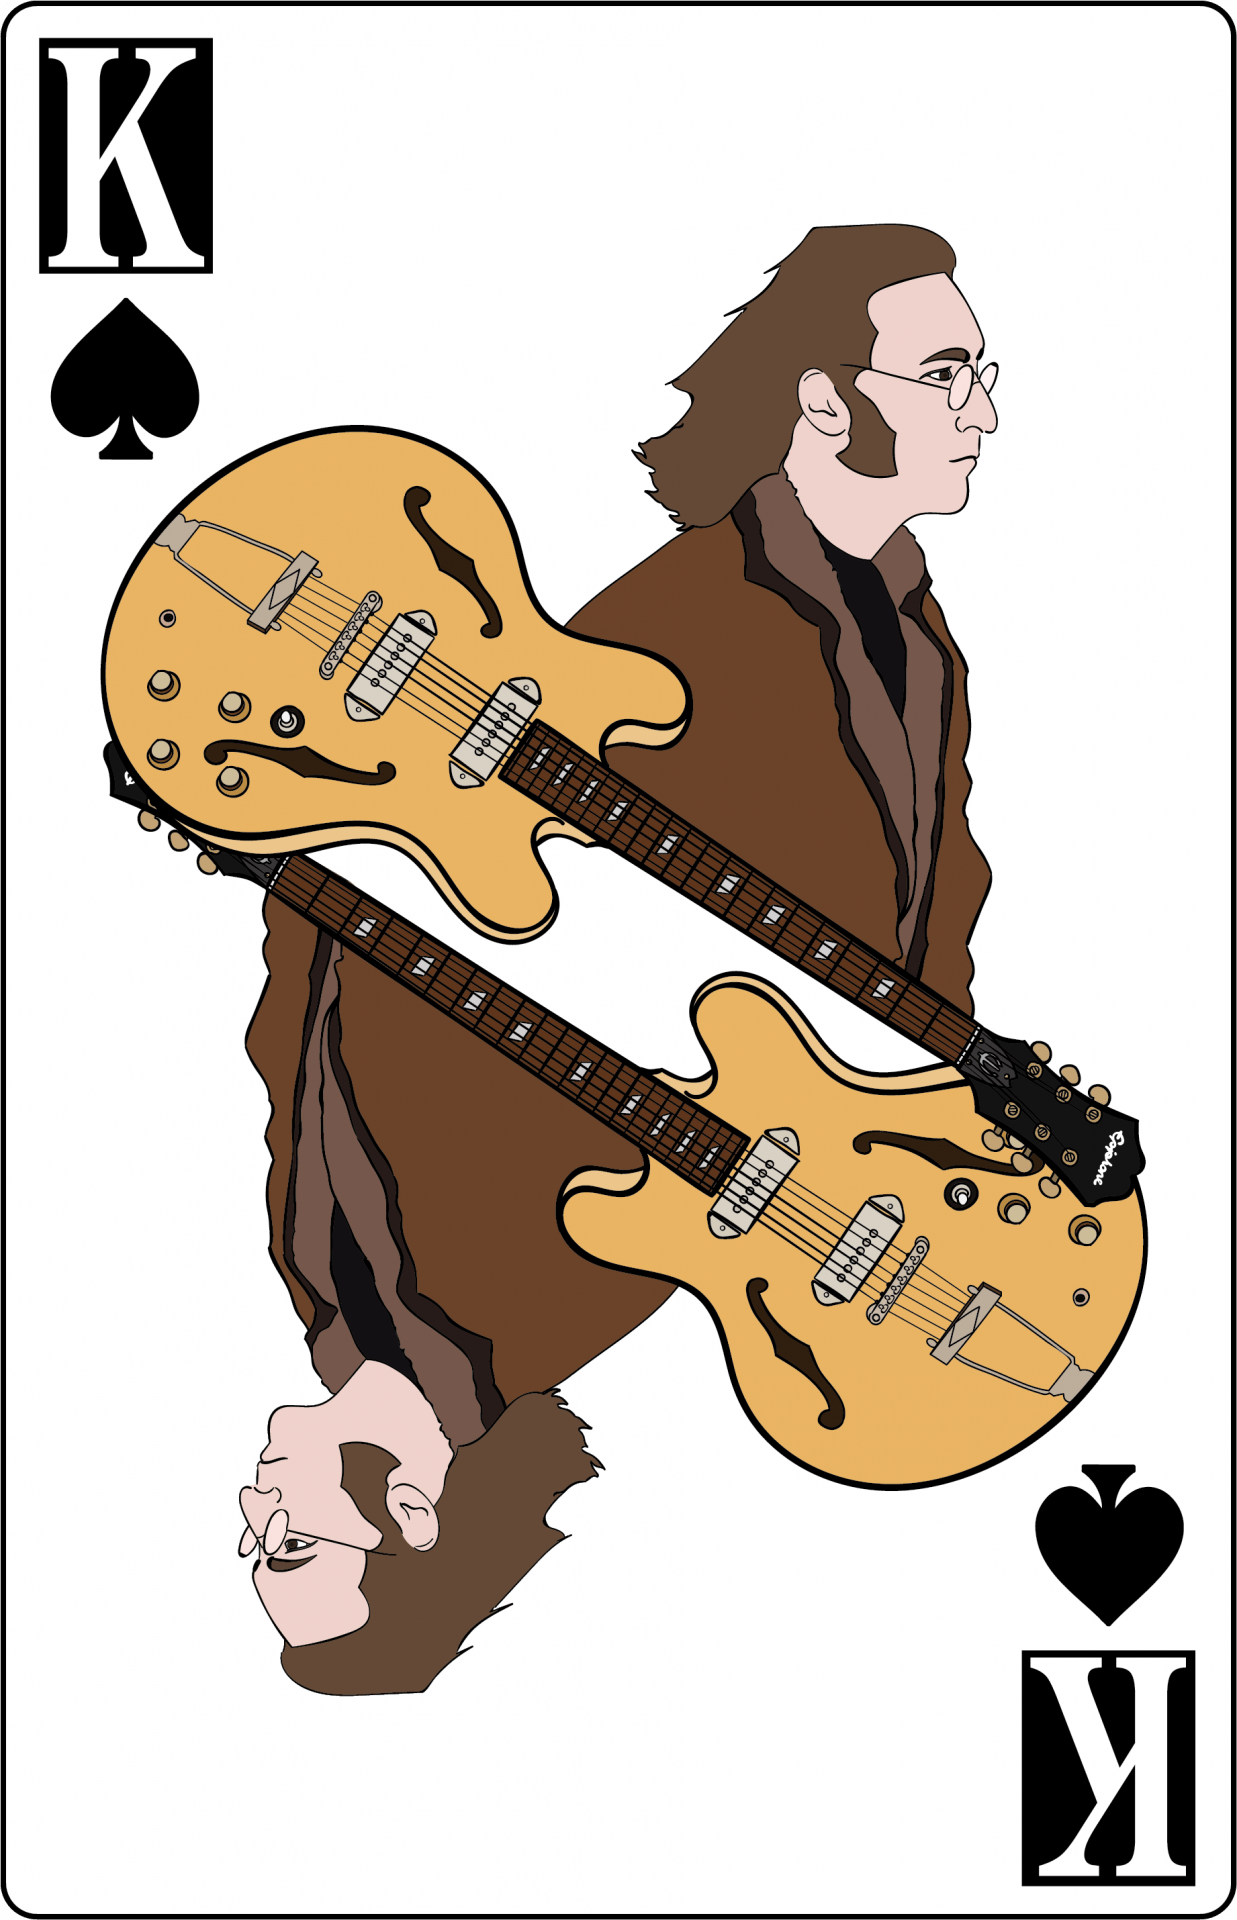 Illustration, John Lennon on a King of Spades playing card, accompanied by an Epiphone Casino guitar